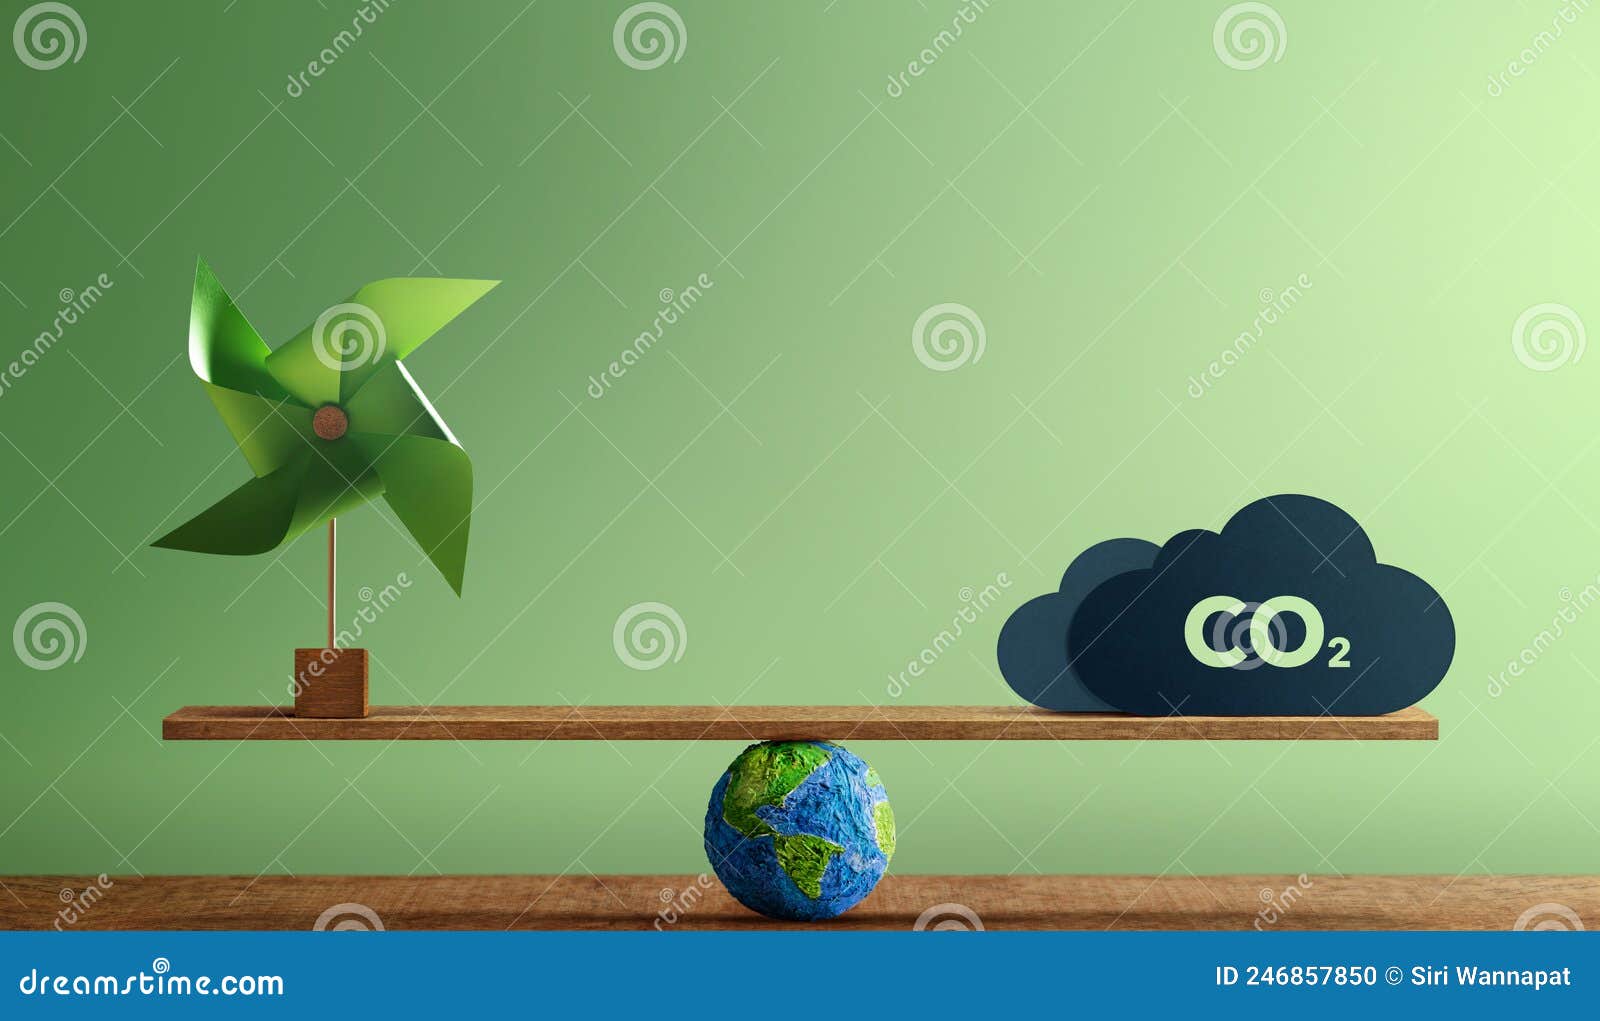 carbon neutral and esg . carbon emission, clean energy. globe balancing between a wind turbine and co2. sustainable